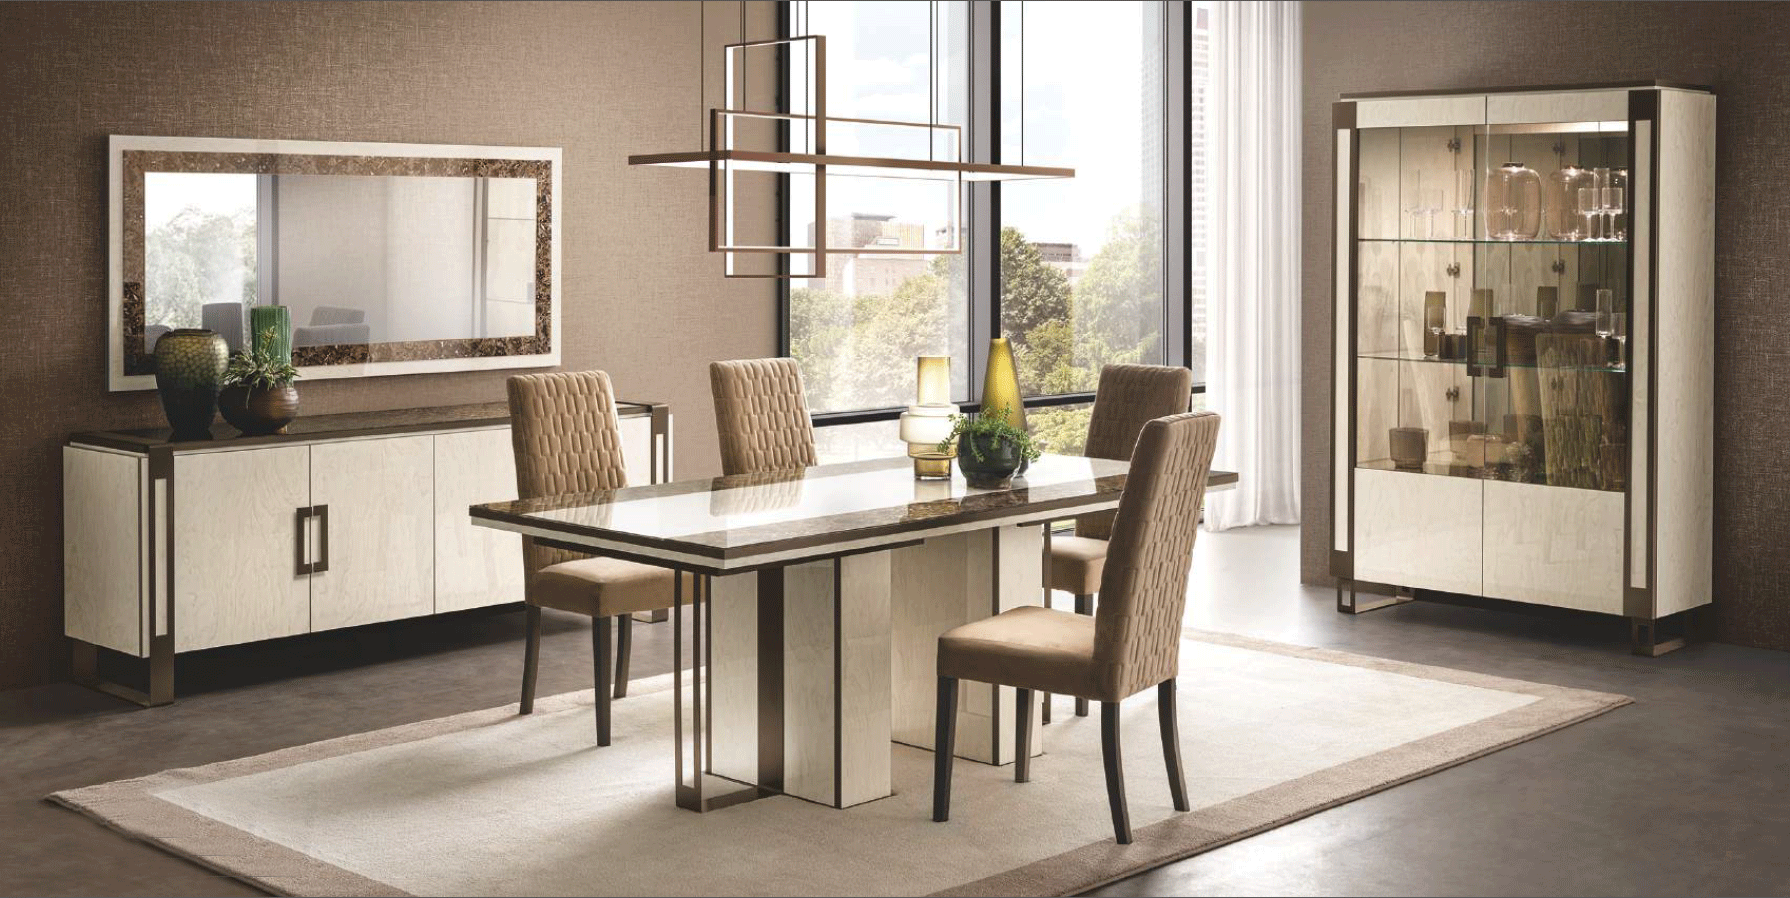 Brands Camel Gold Collection, Italy Poesia Dining room Additional items